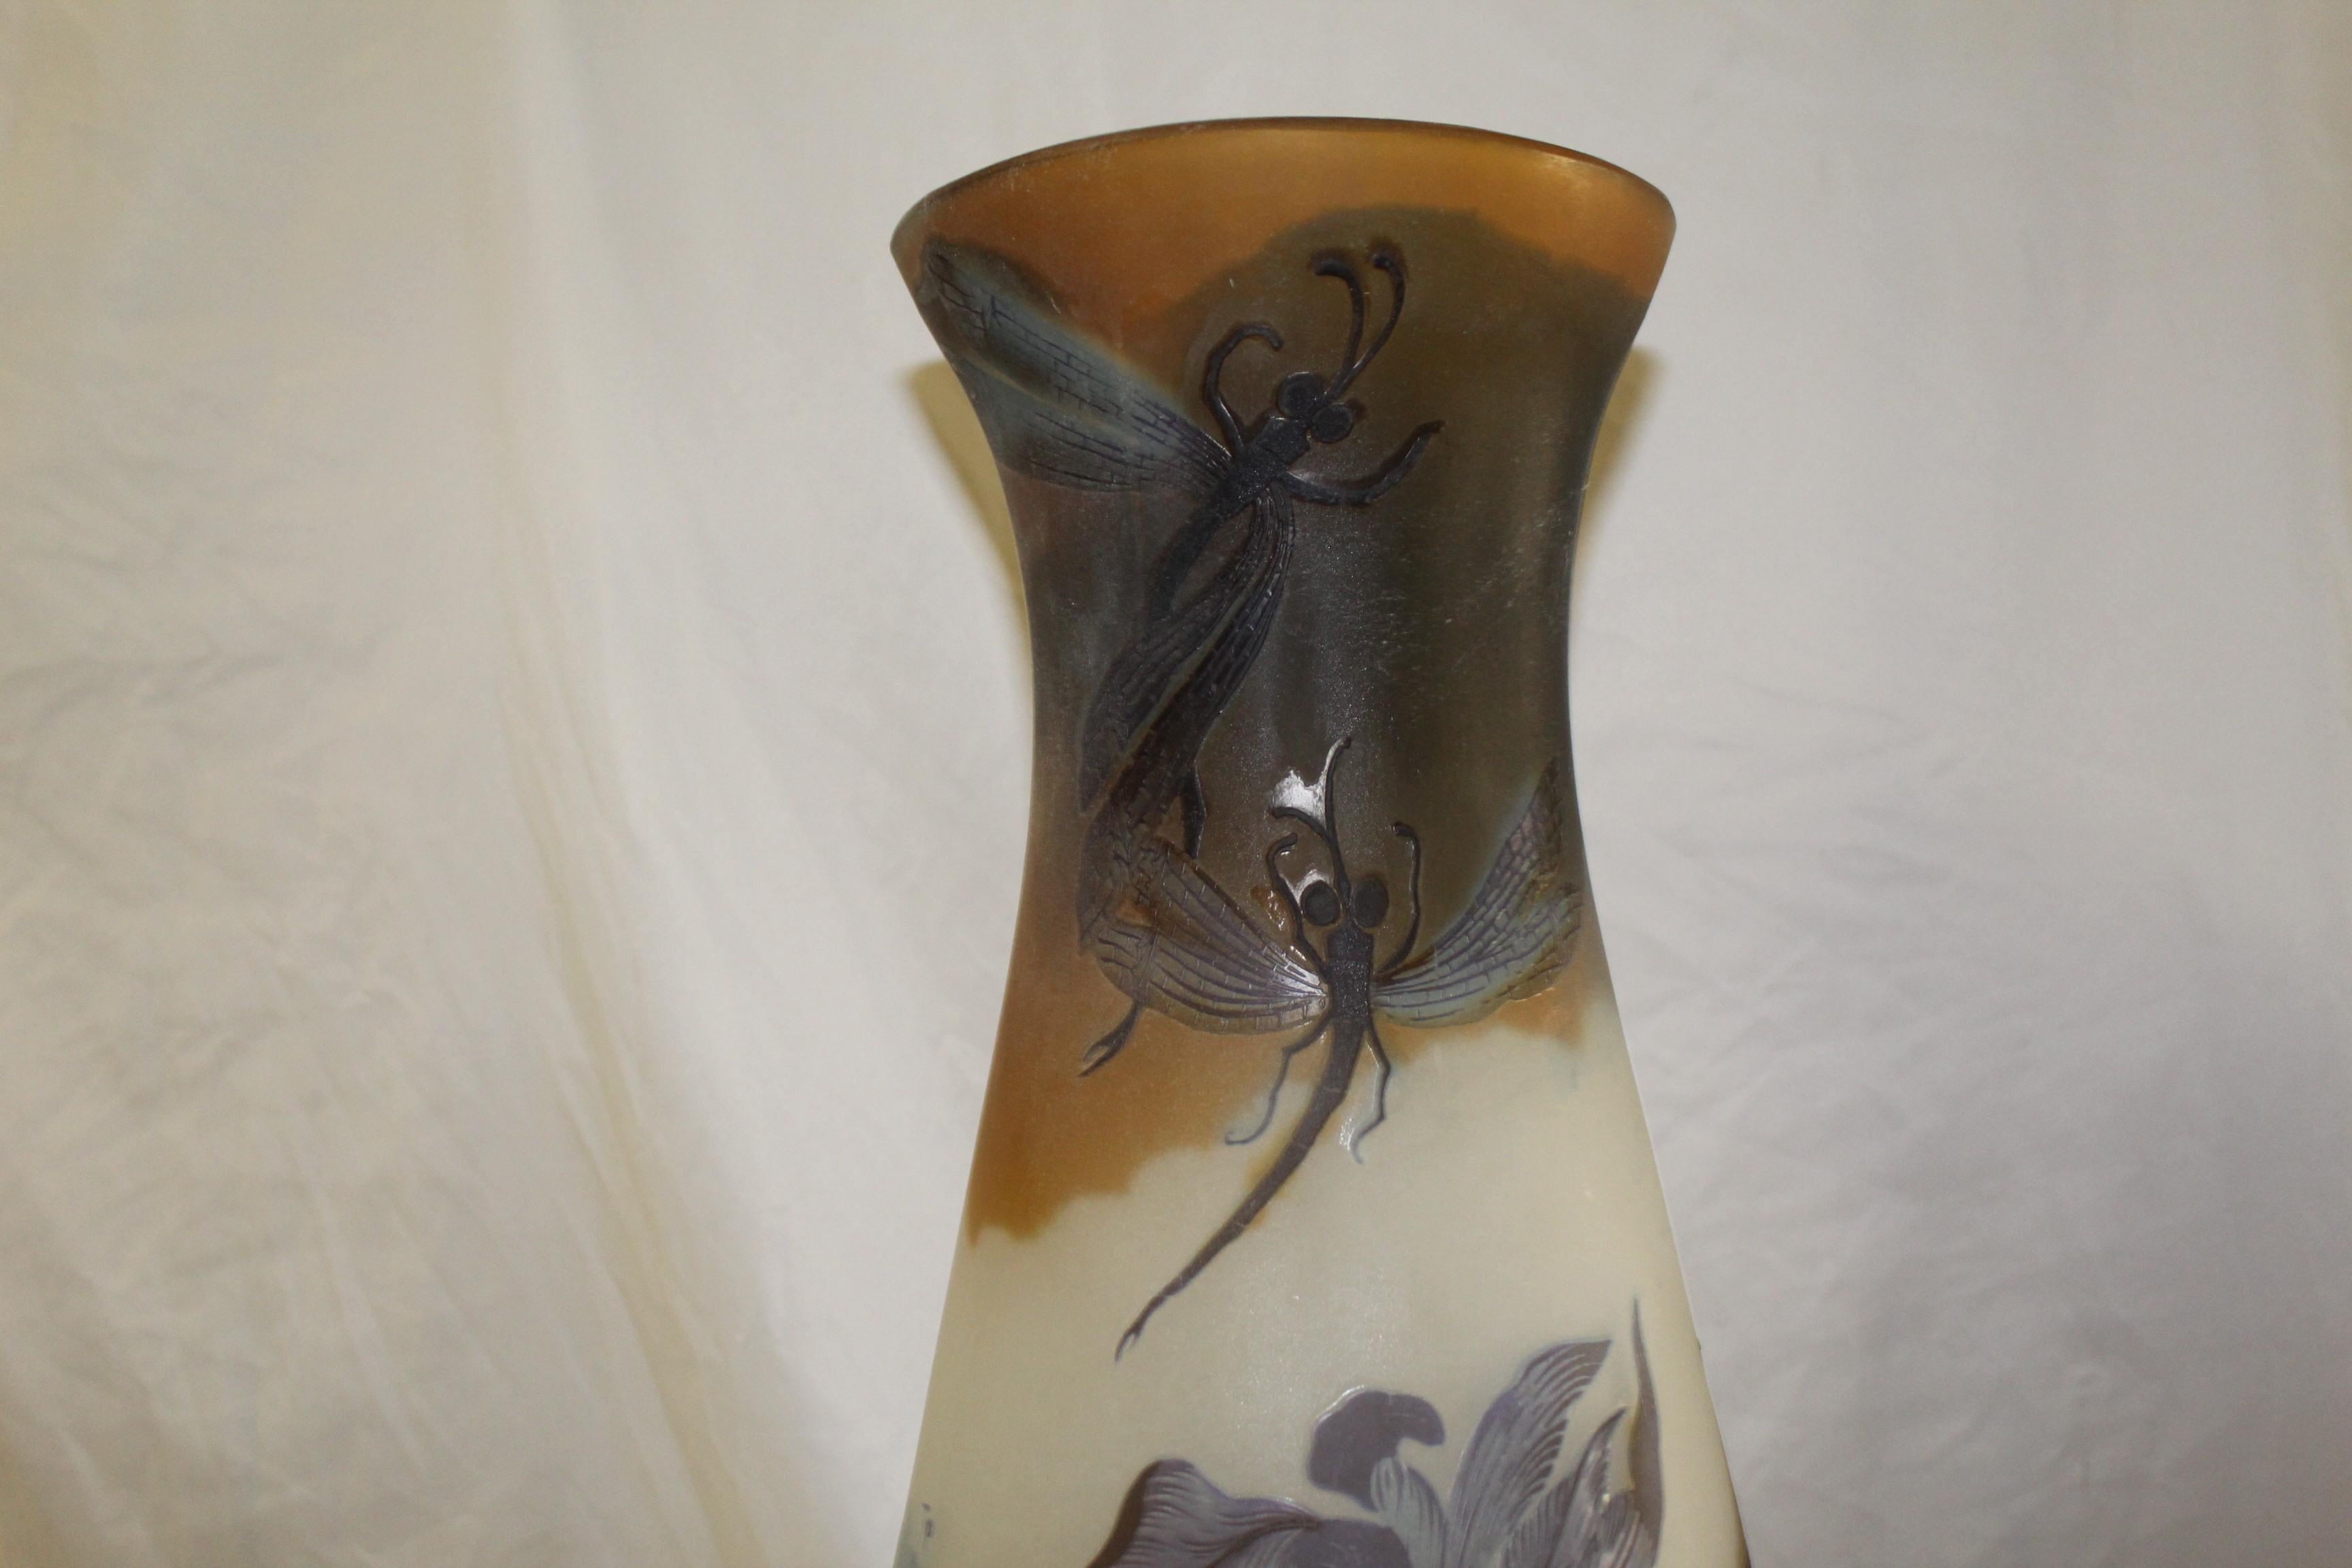 European Art Nouveau Style, Extra Large Glass Vase After Galle', Very Rare For Sale